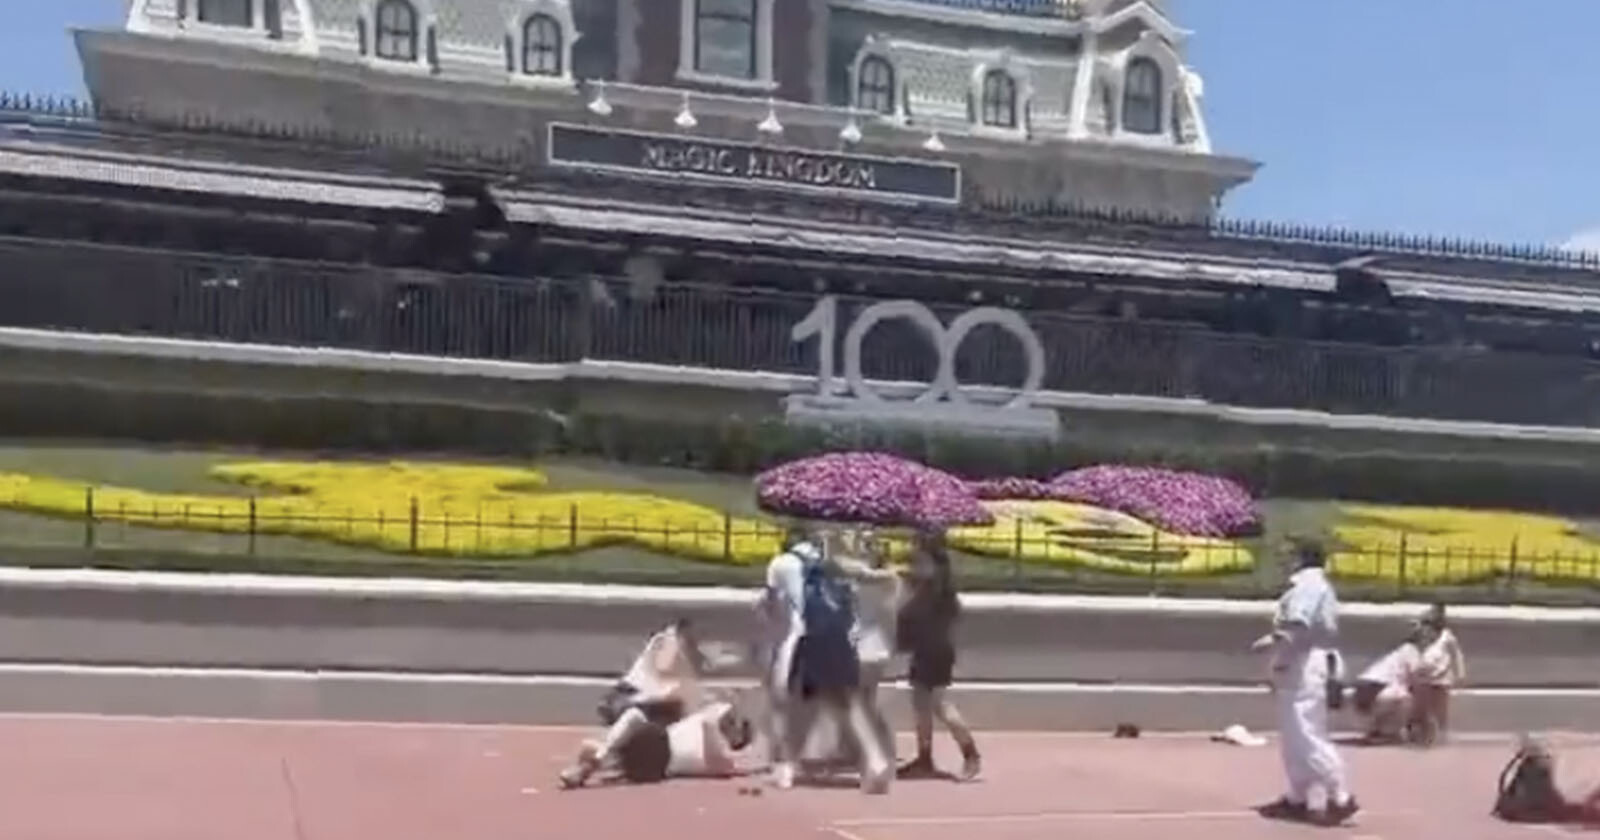 Two Families Brawl Over a Photo Opportunity in Disney World